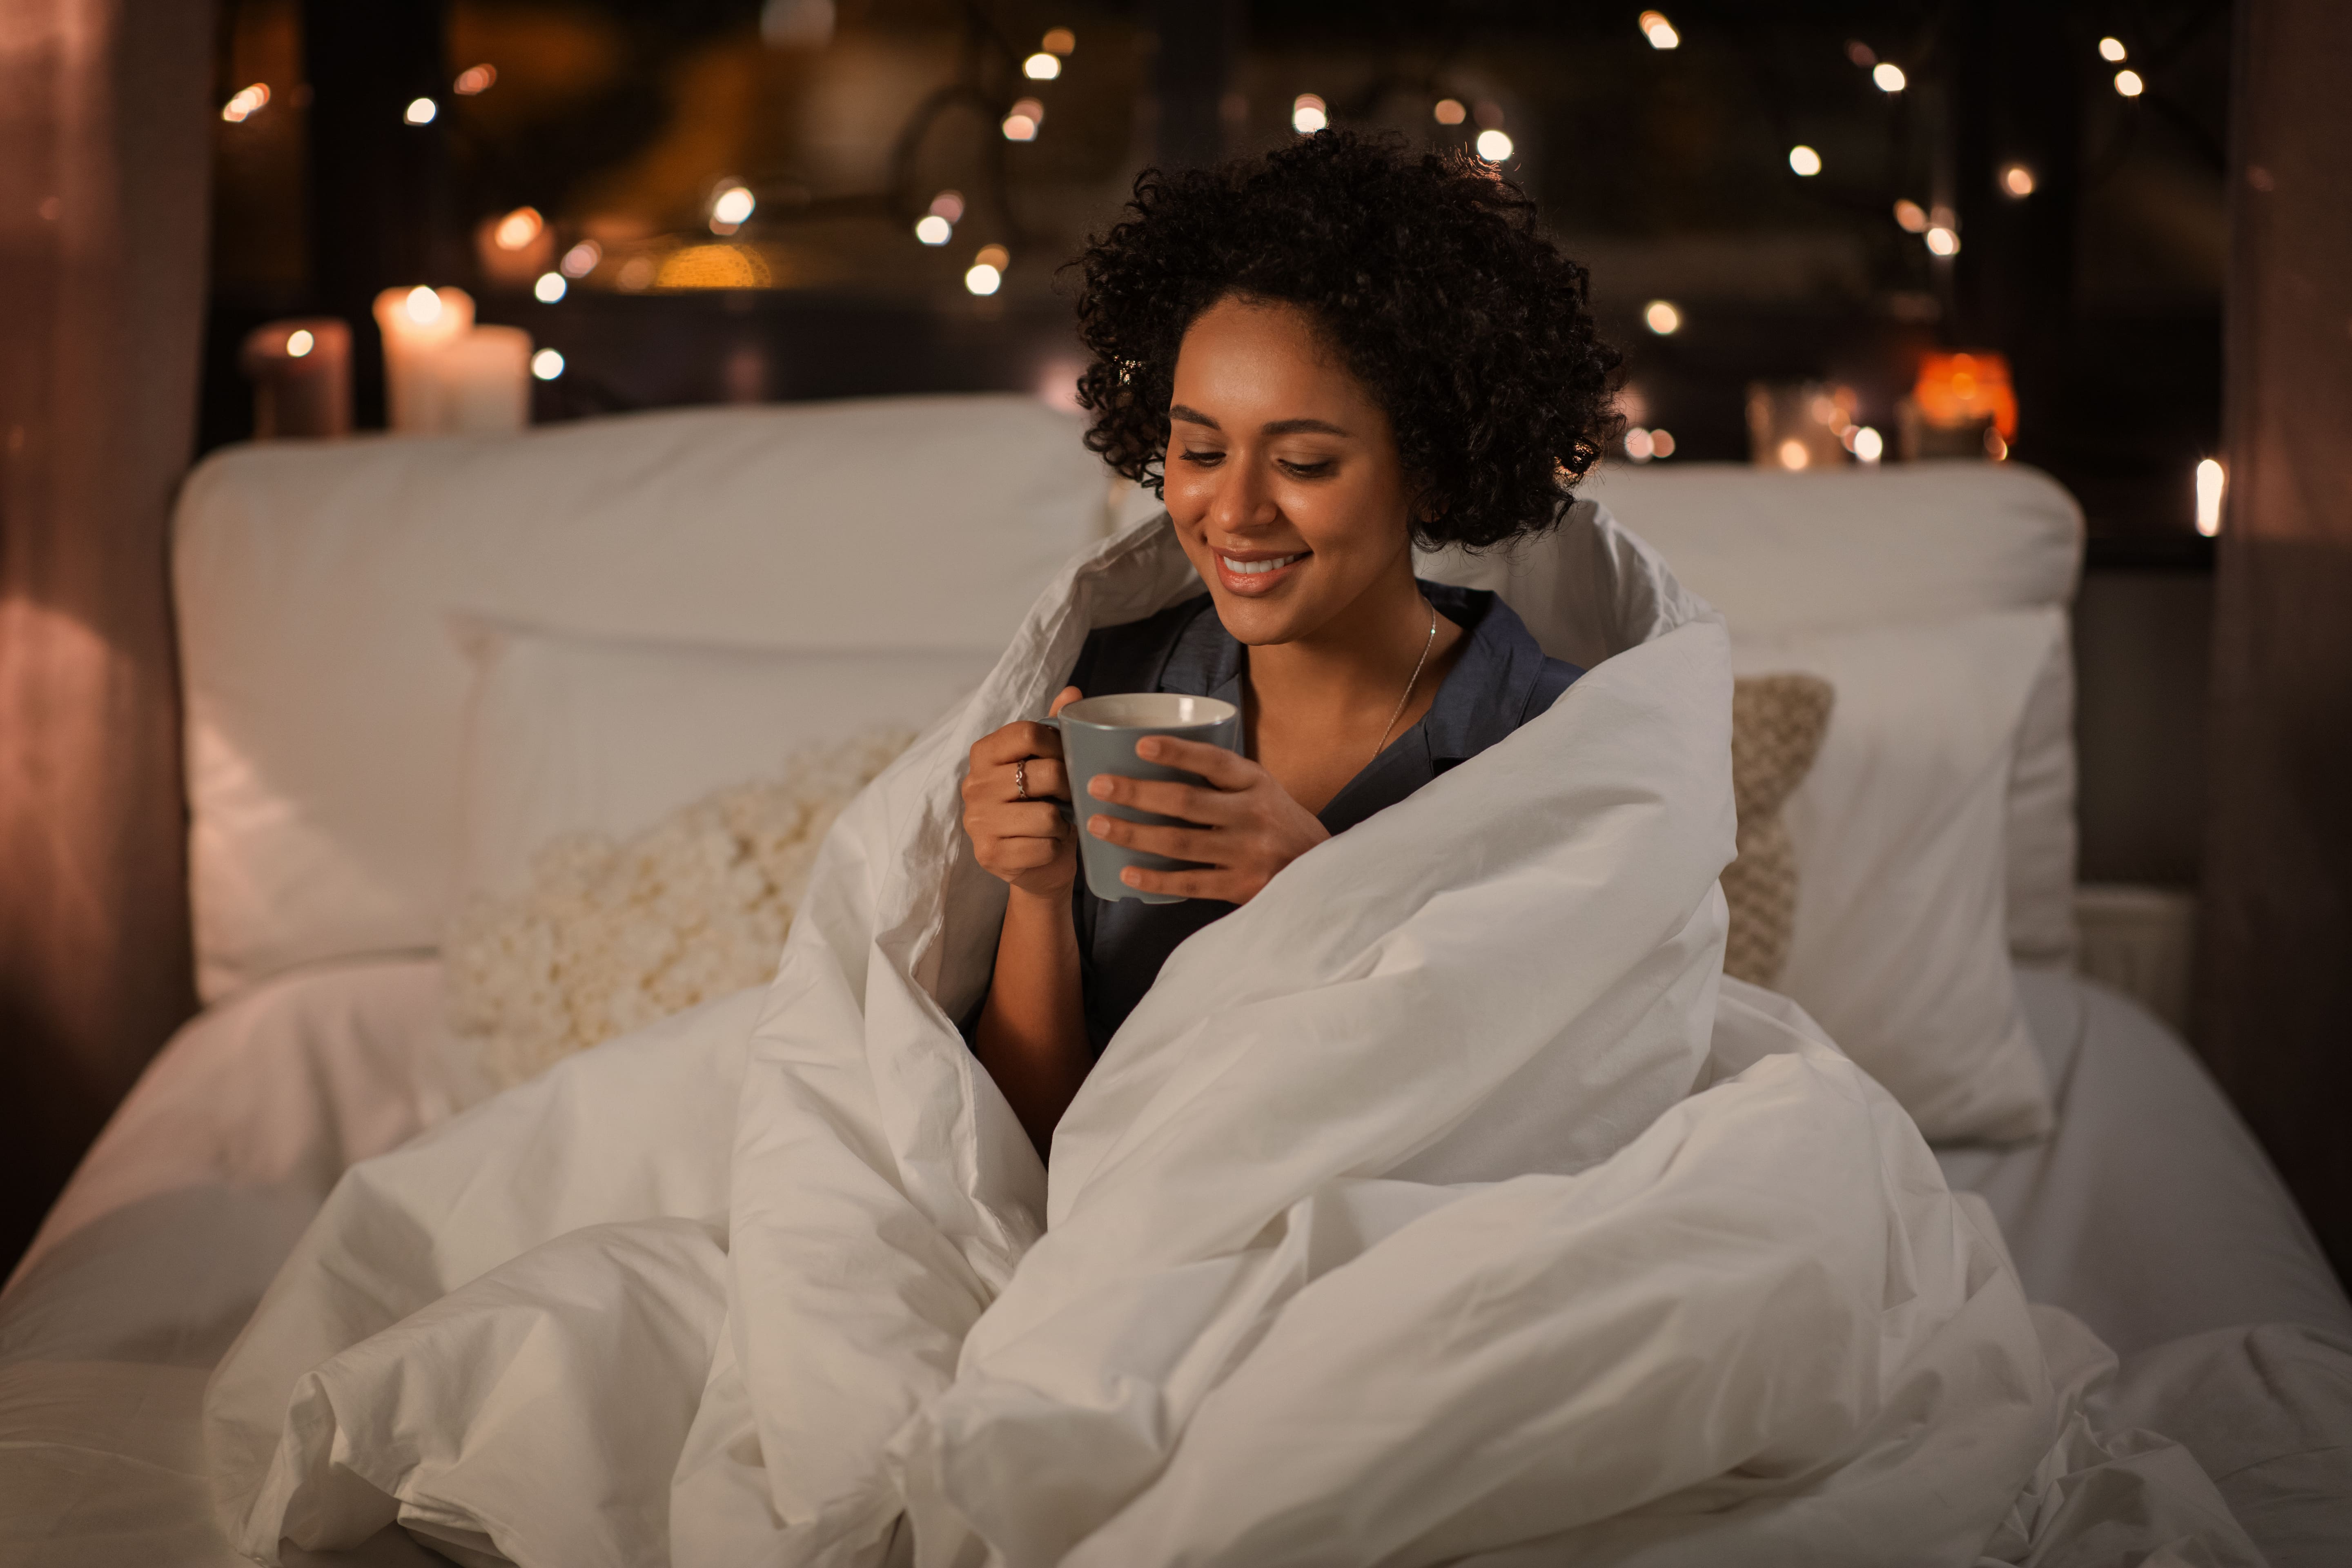 Woman sitting up in bed wrapped in a duvet holding a mug and smiling.